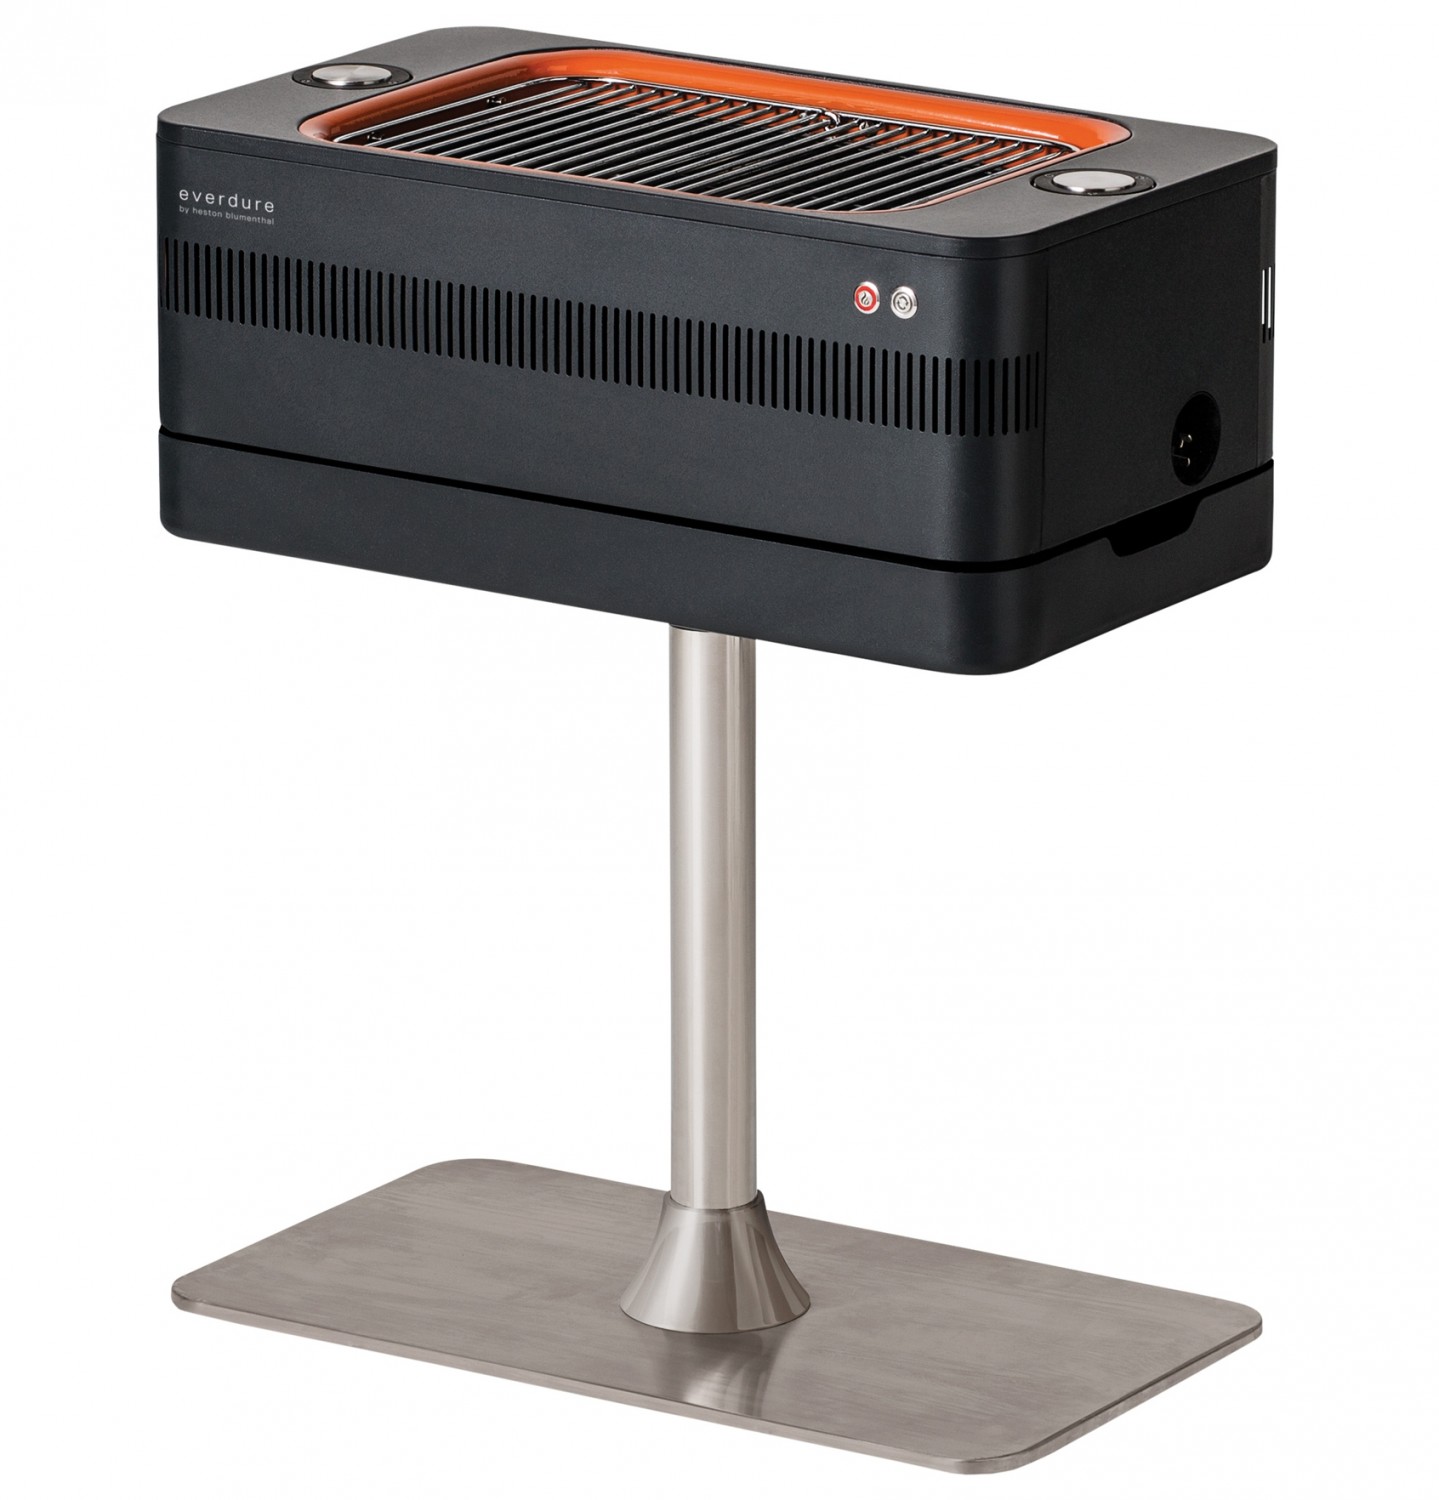 Grill Everdure by Heston Blumenthal Furnace, Everdure by Heston Blumenthal Fusion im Test , Bild 2